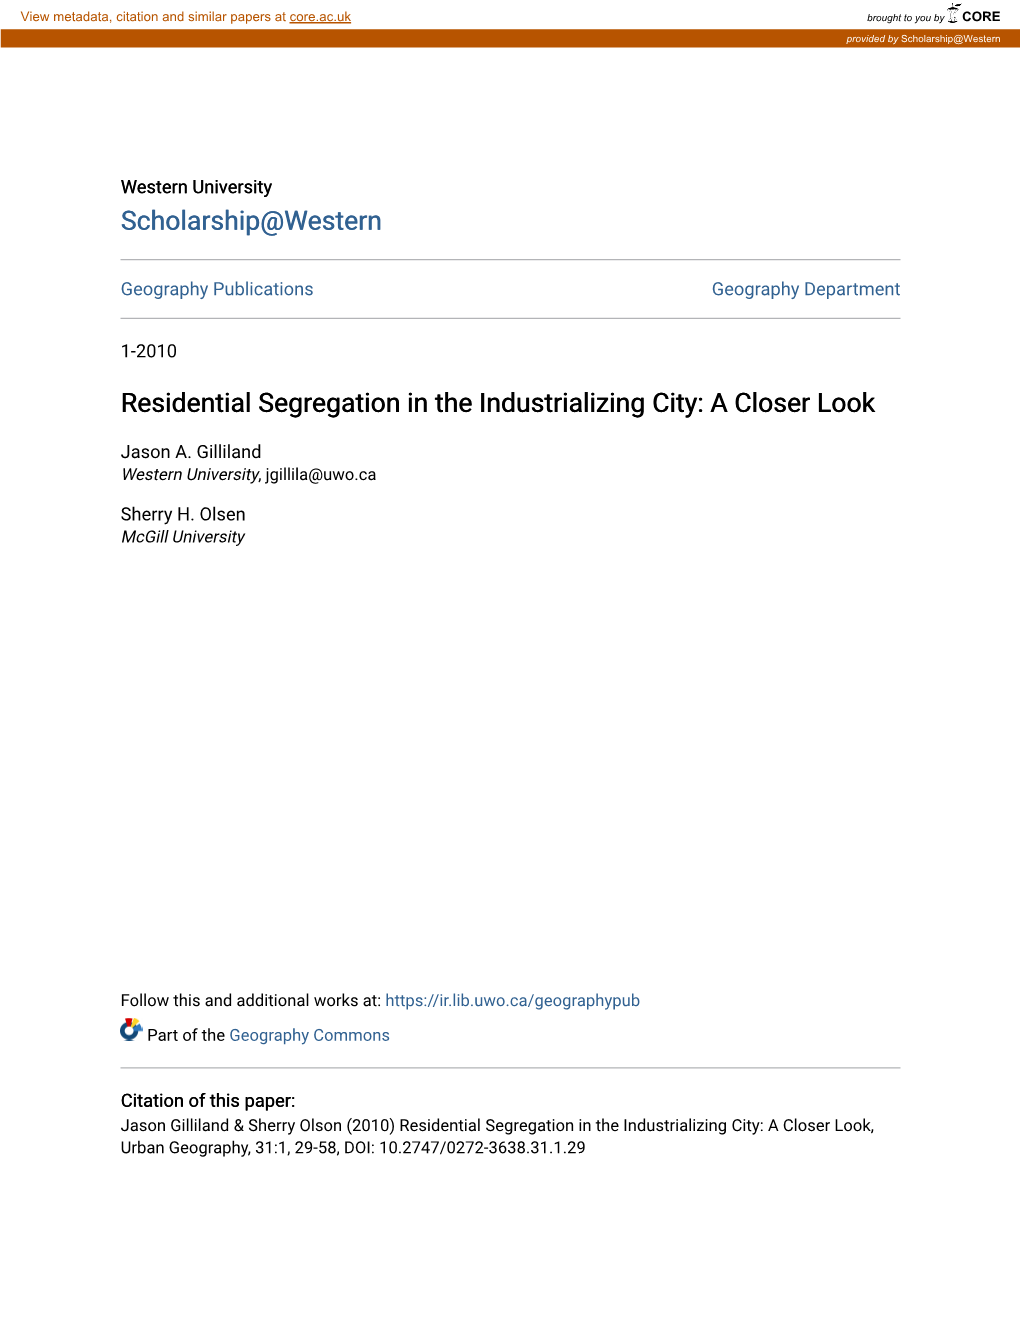 Residential Segregation in the Industrializing City: a Closer Look